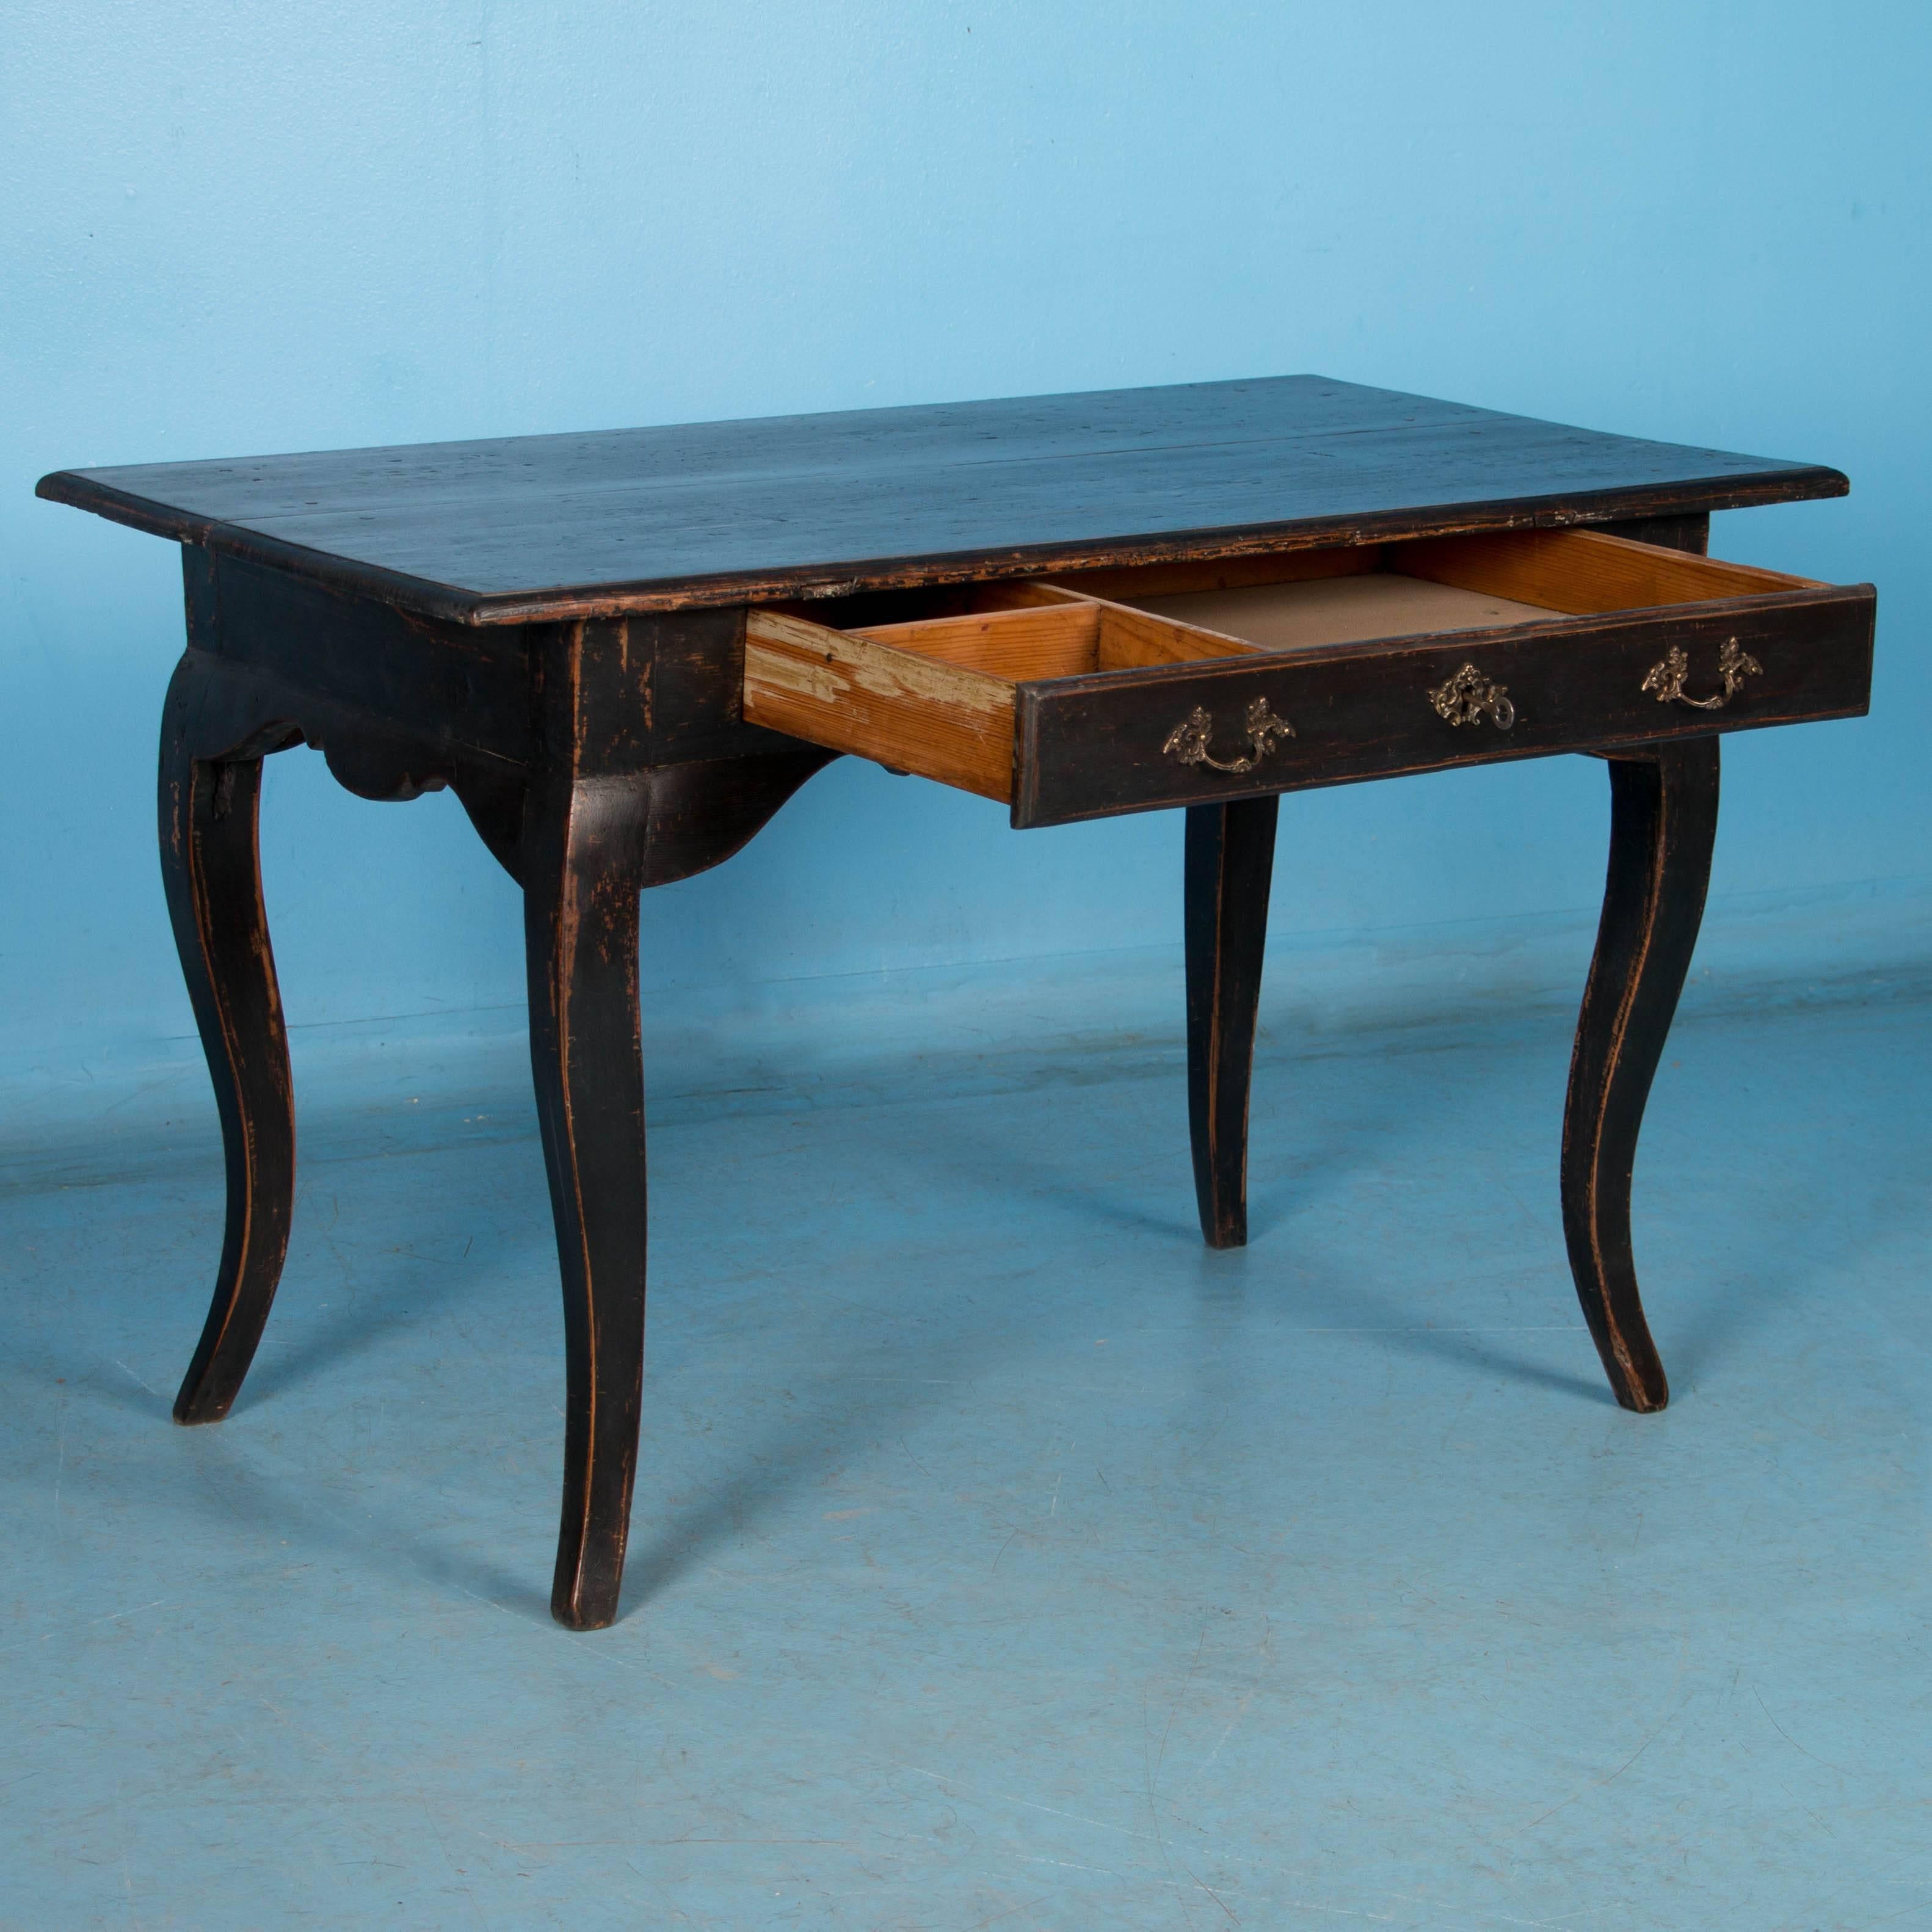 Swedish Antique 18th Century Baroque Side Table With Black Paint